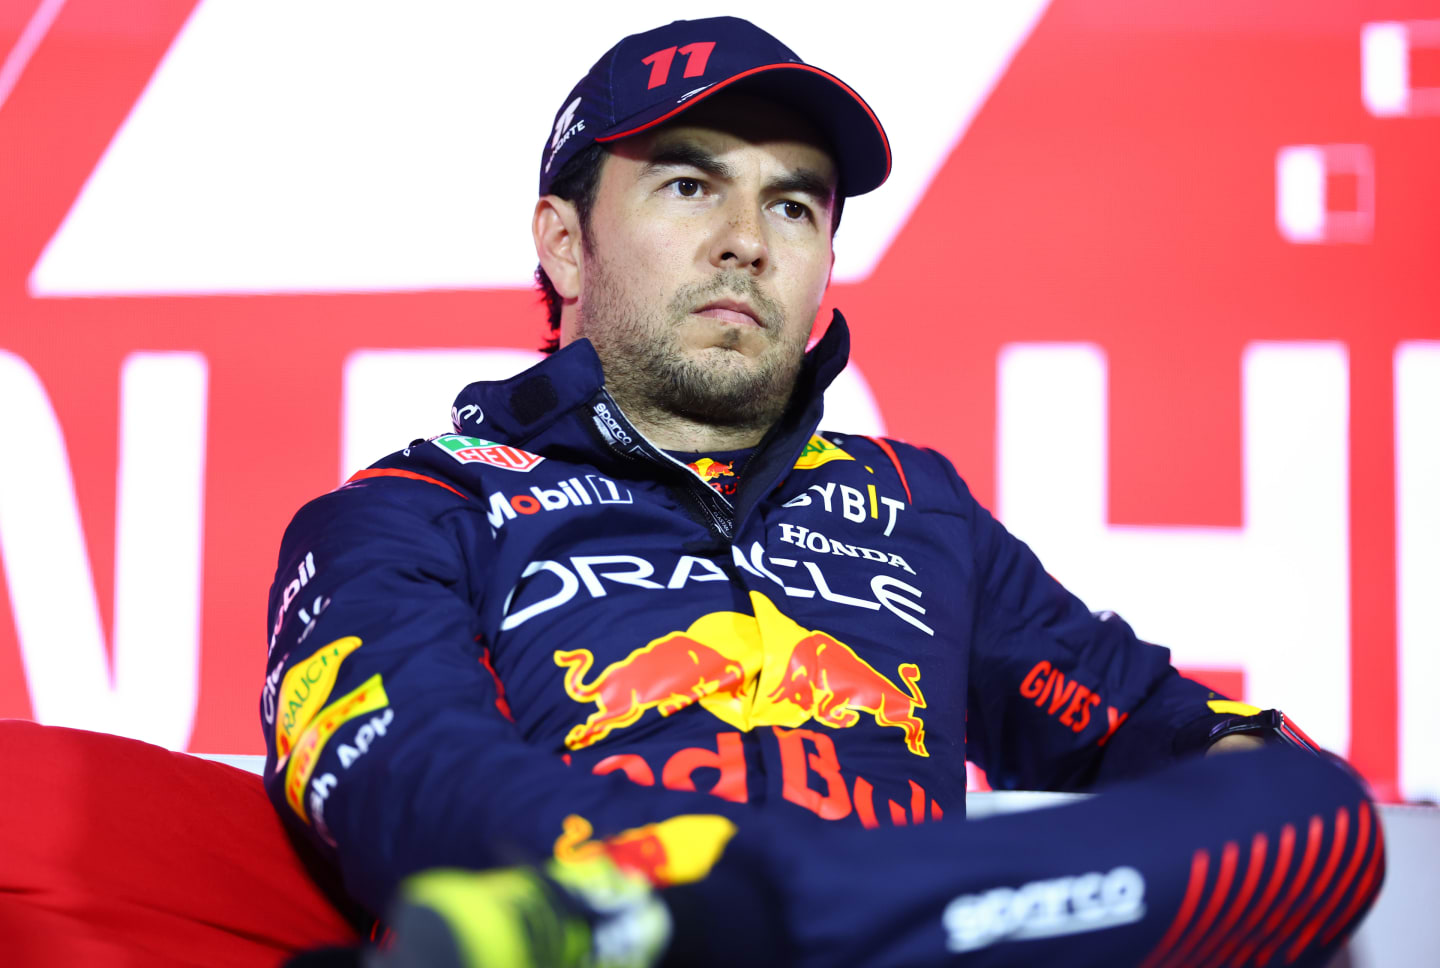 BAHRAIN, BAHRAIN - MARCH 04: Second placed qualifier Sergio Perez of Mexico and Oracle Red Bull Racing attends the press conference after qualifying ahead of the F1 Grand Prix of Bahrain at Bahrain International Circuit on March 04, 2023 in Bahrain, Bahrain. (Photo by Dan Istitene/Getty Images)